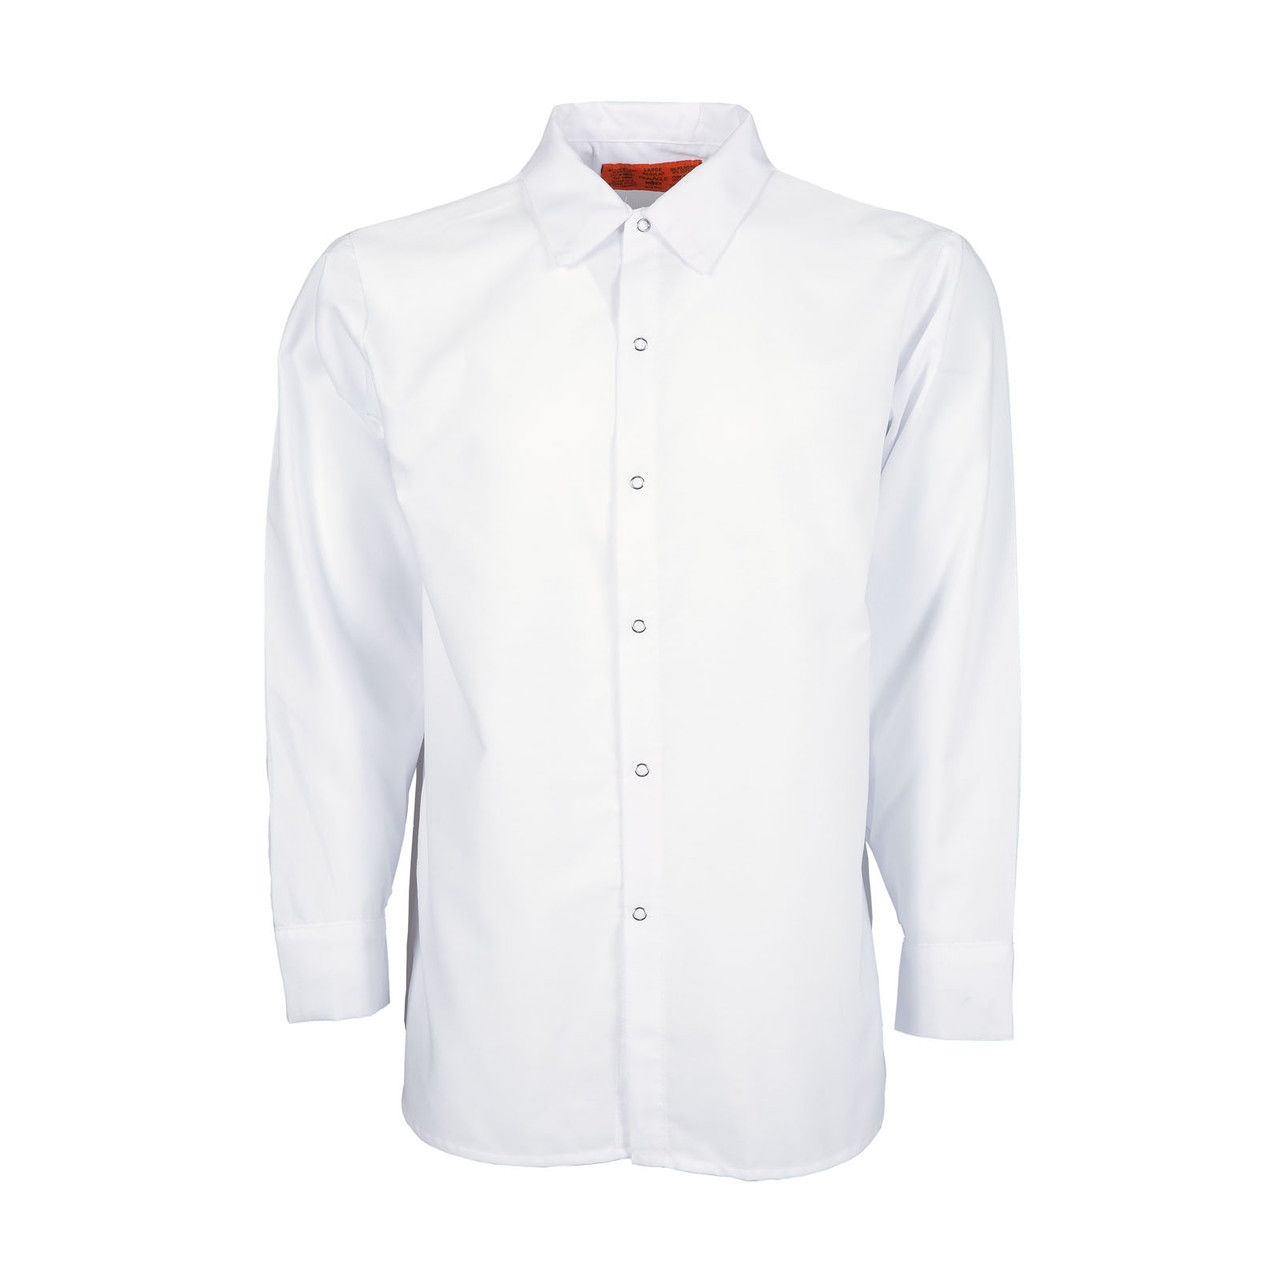 Does the white work shirts mens have any pockets?